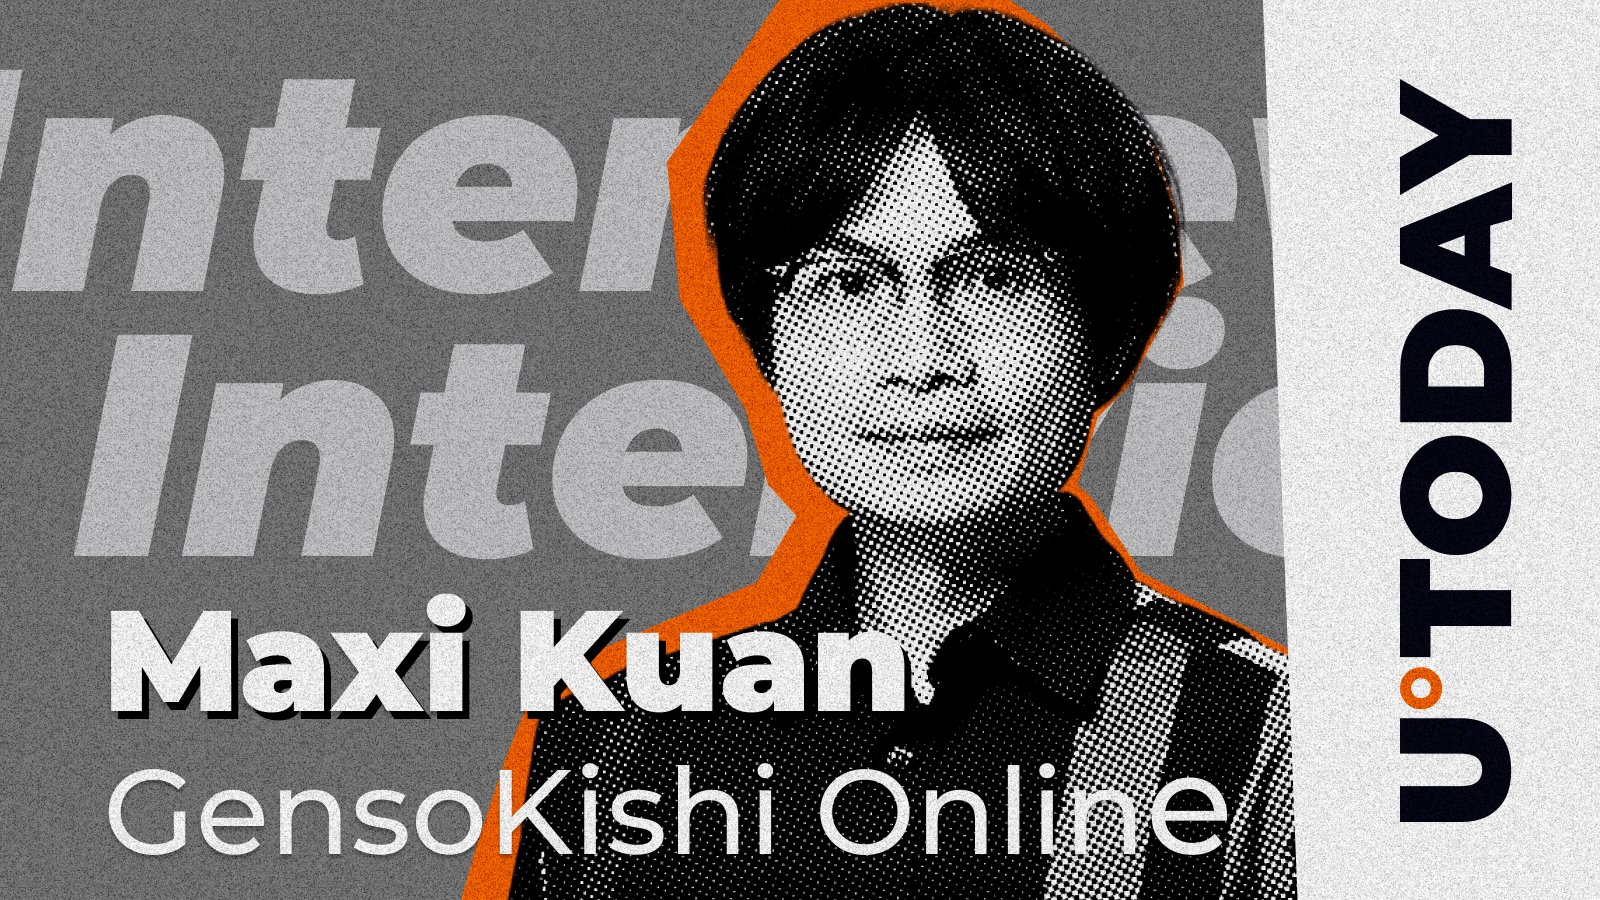 Entering GameFi, Innovation Trends with Genso Meta and More: Interview With Maxi Kuan, CEO of GensoKishi Online and Genso Meta